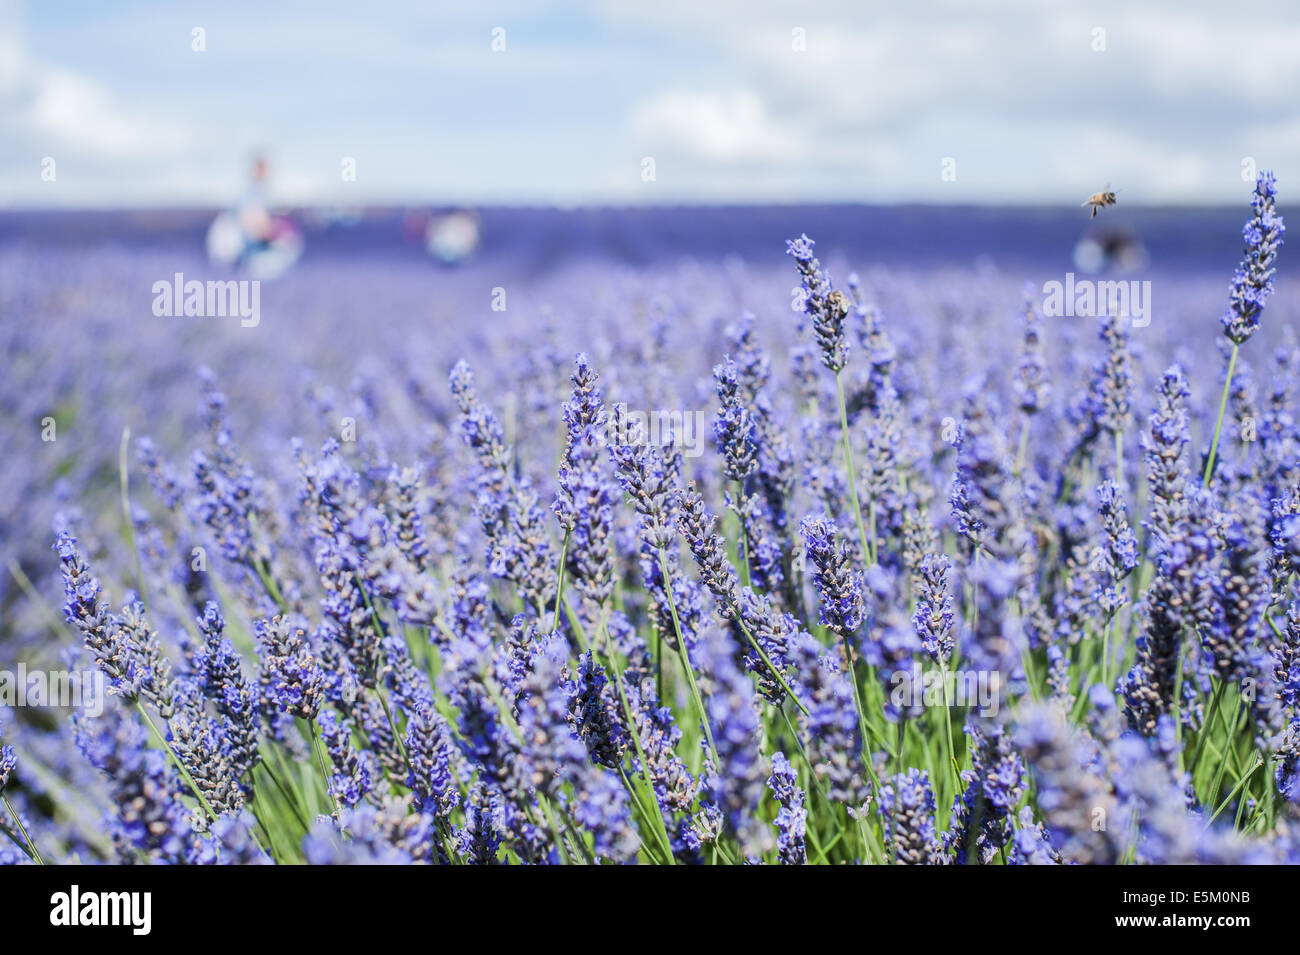 Lavender flowers in a field at the Hitchin Lavender farm (Cadwell Farm) near London, UK on 3 August 2014. Stock Photo